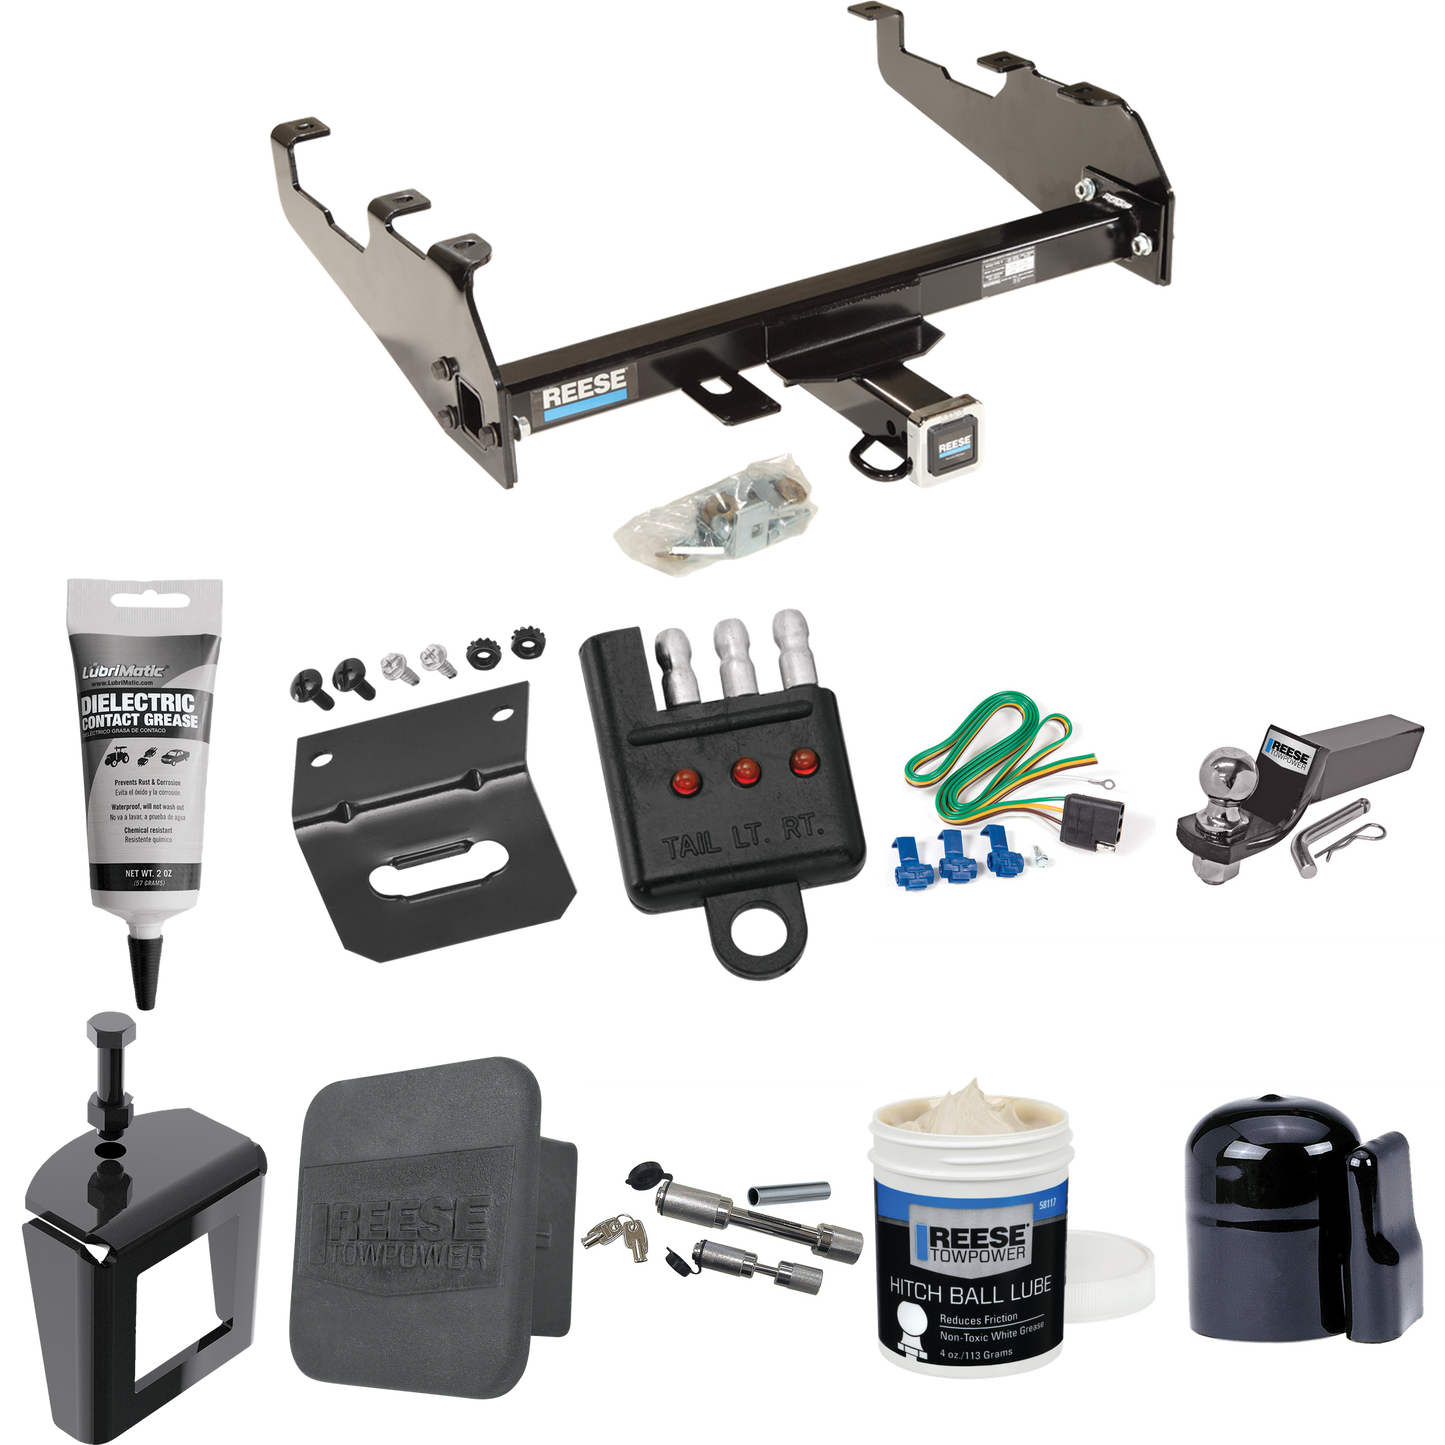 Fits 1999-2000 Ford F-350 Super Duty Trailer Hitch Tow PKG w/ 4-Flat Wiring + Starter Kit Ball Mount w/ 2" Drop & 2" Ball + 1-7/8" Ball + Wiring Bracket + Dual Hitch & Coupler Locks + Hitch Cover + Wiring Tester + Ball Lube + Electric Grease + Ball W